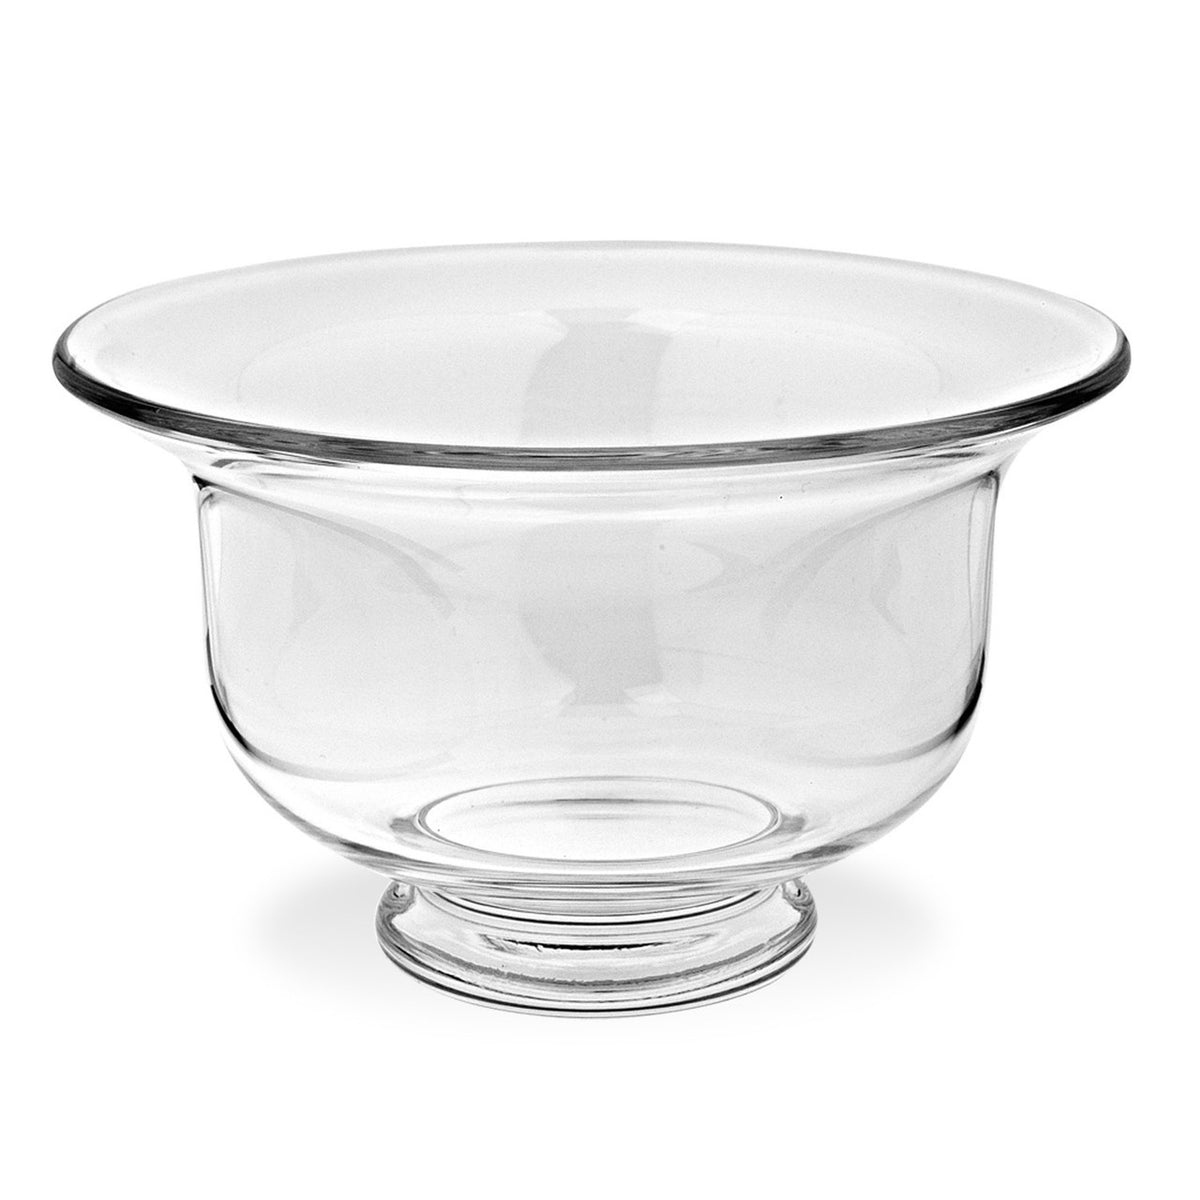 Ace Large Revere 11 inch Bowl